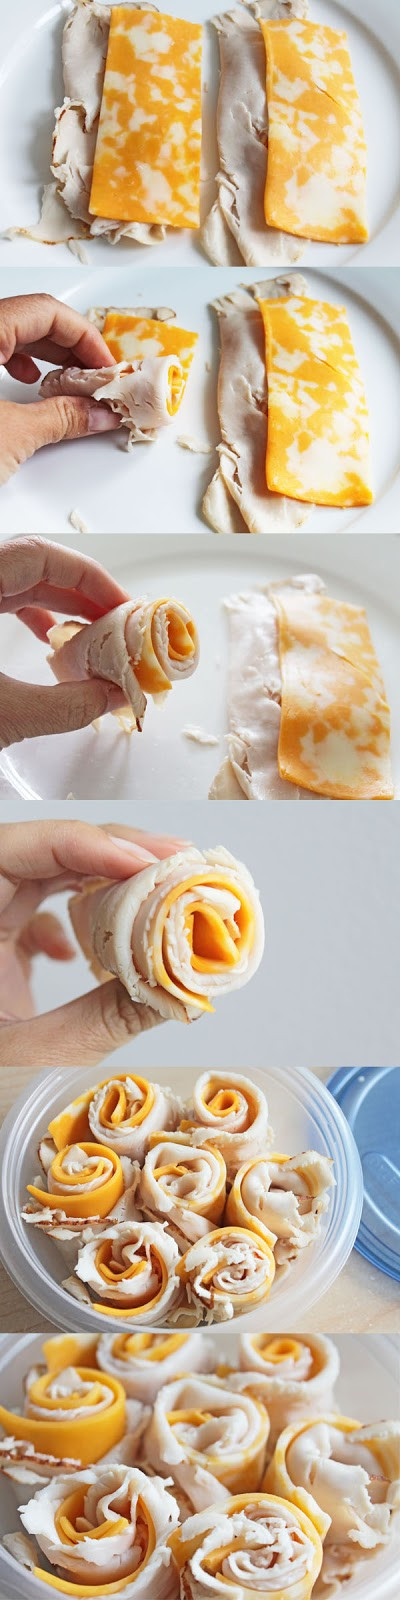 Easy Healthy Snacks To Make
 Easy to Make Snacks Turkey and Cheese Rolls Recipe